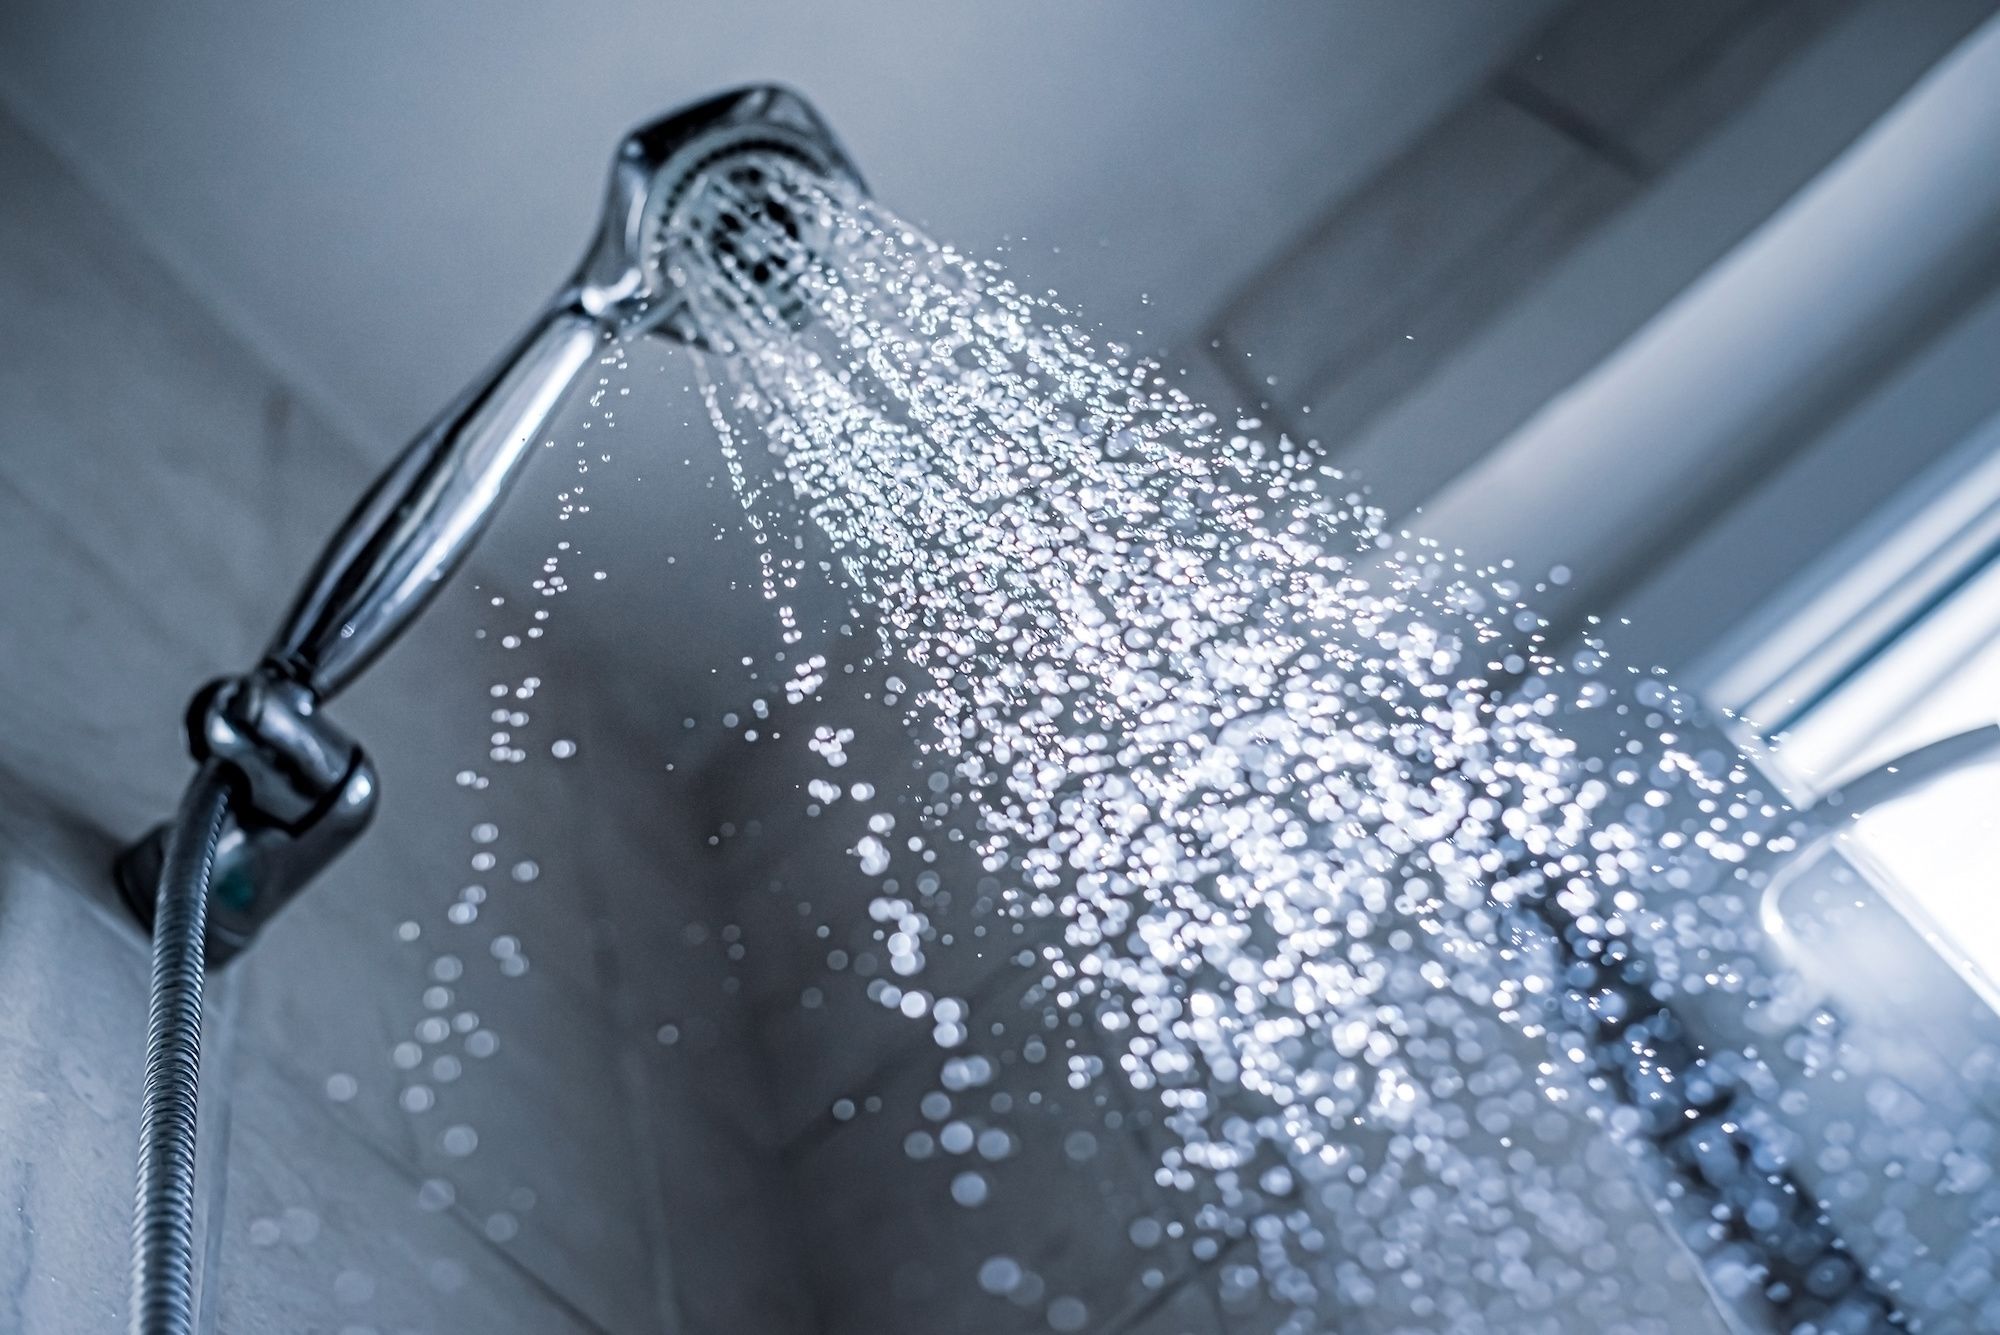 What are the benefits of a cold shower?